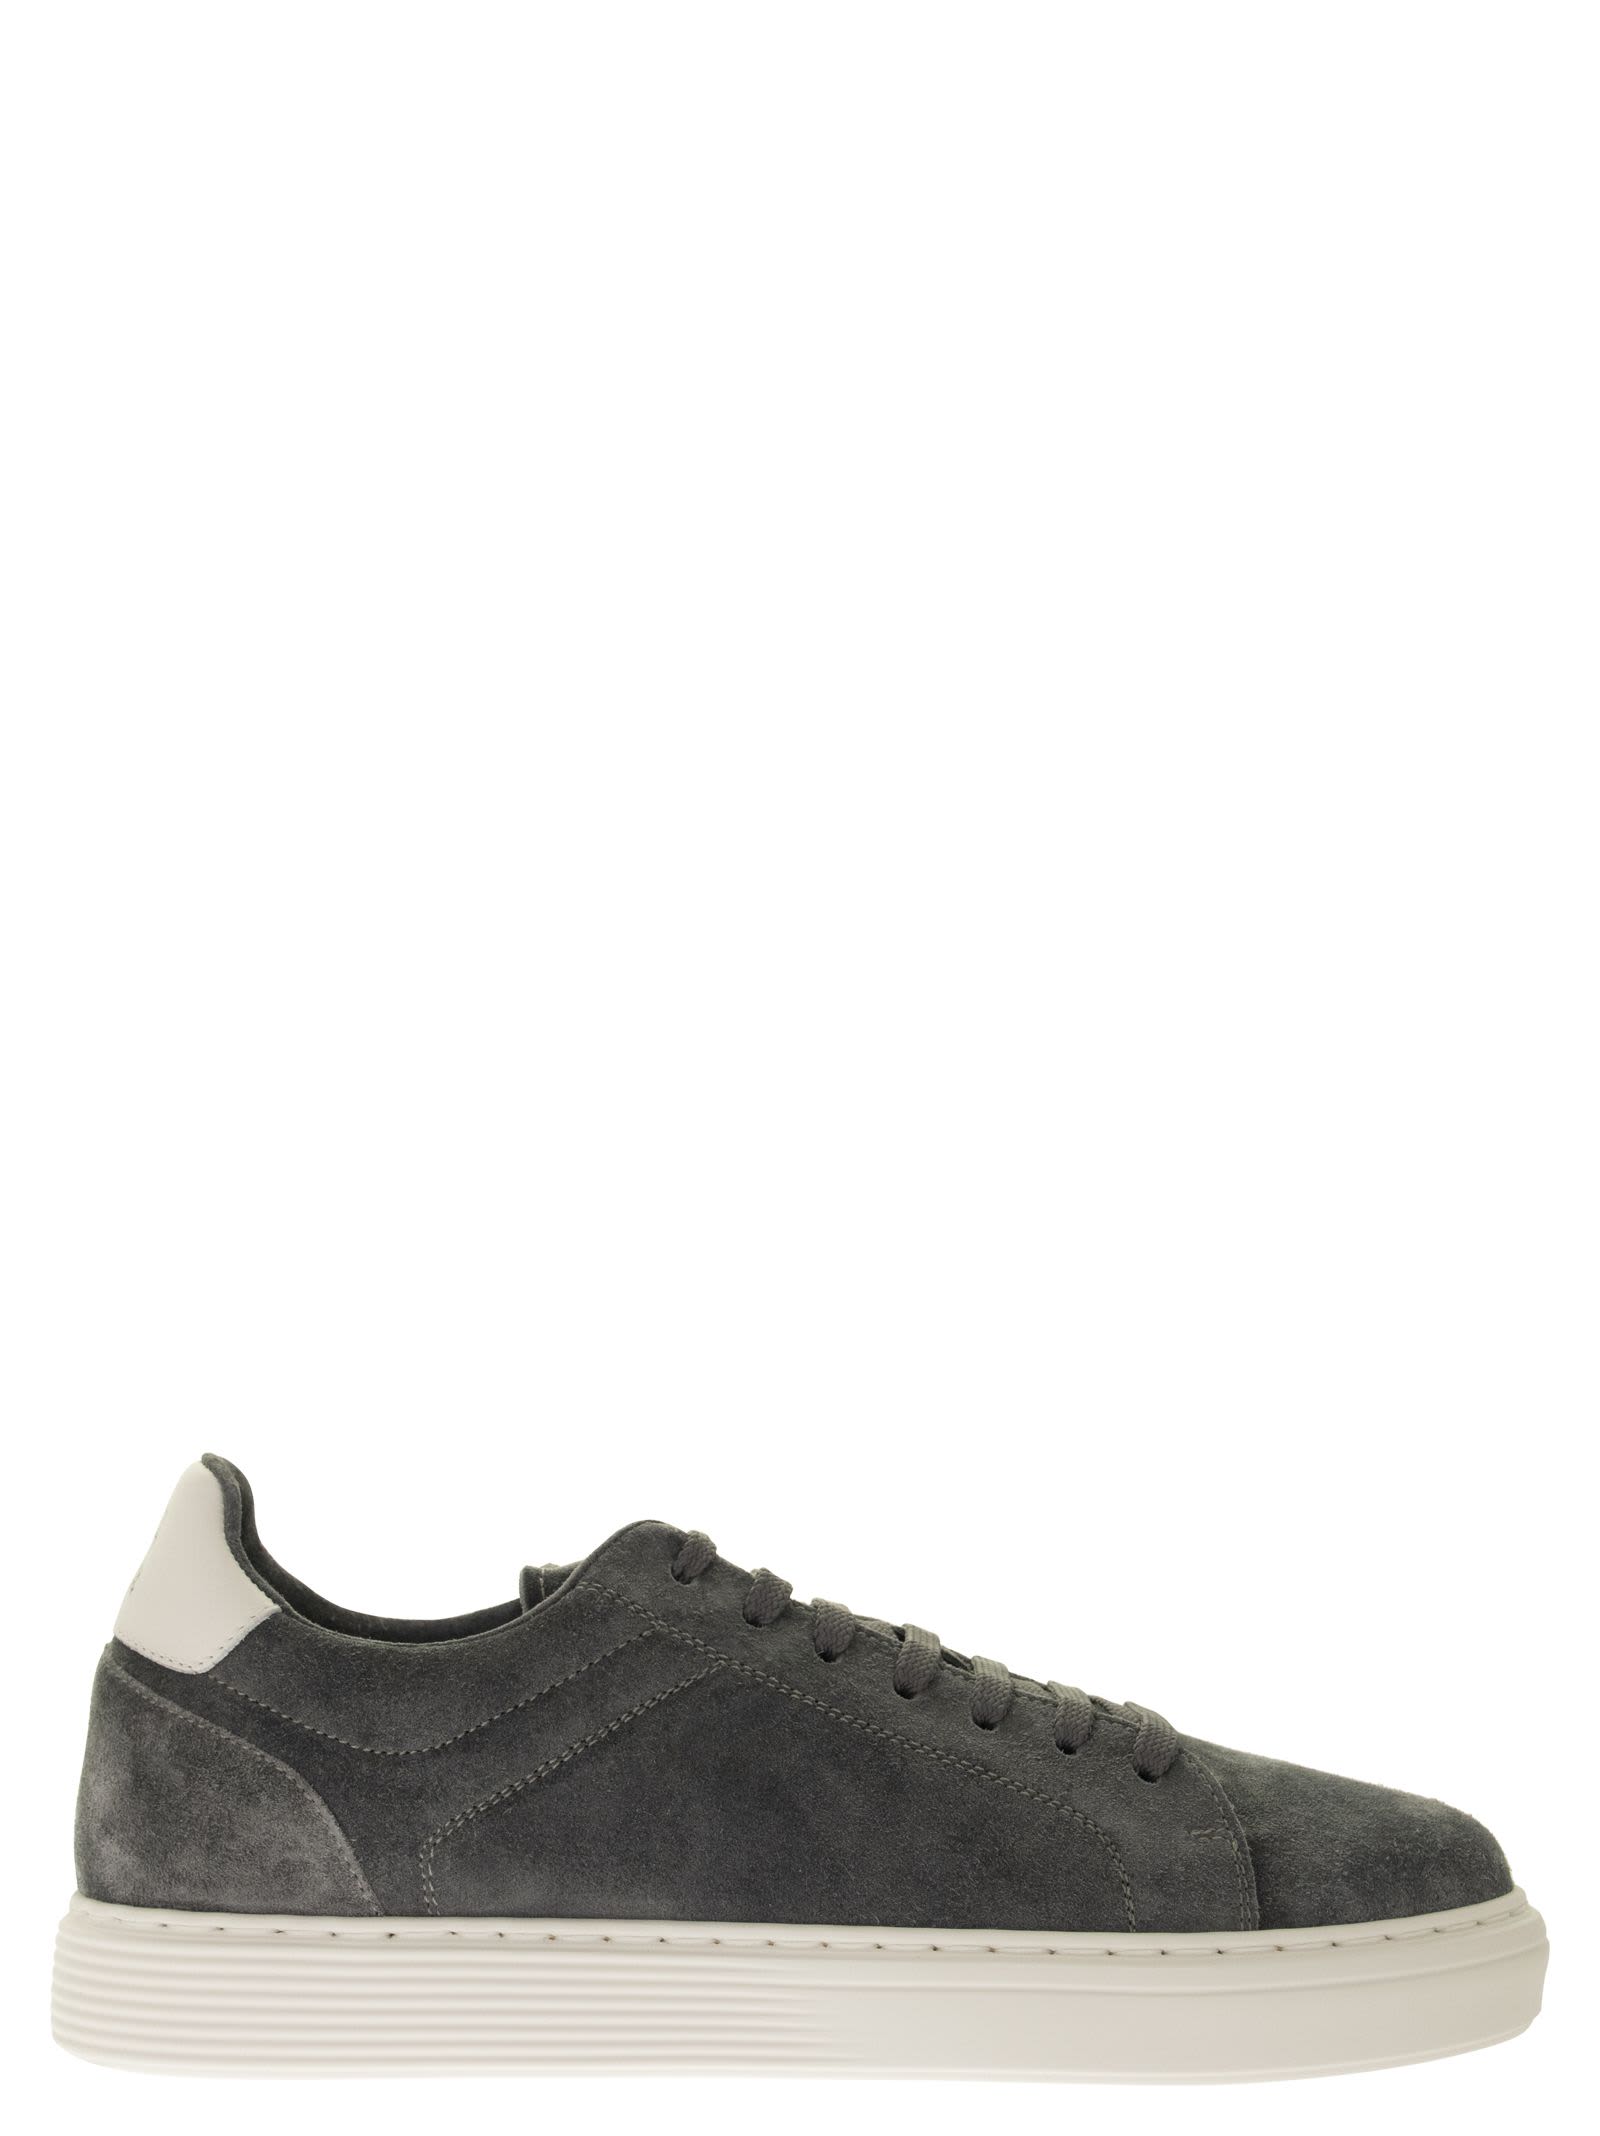 Brunello Cucinelli Washed Suede Sneakers